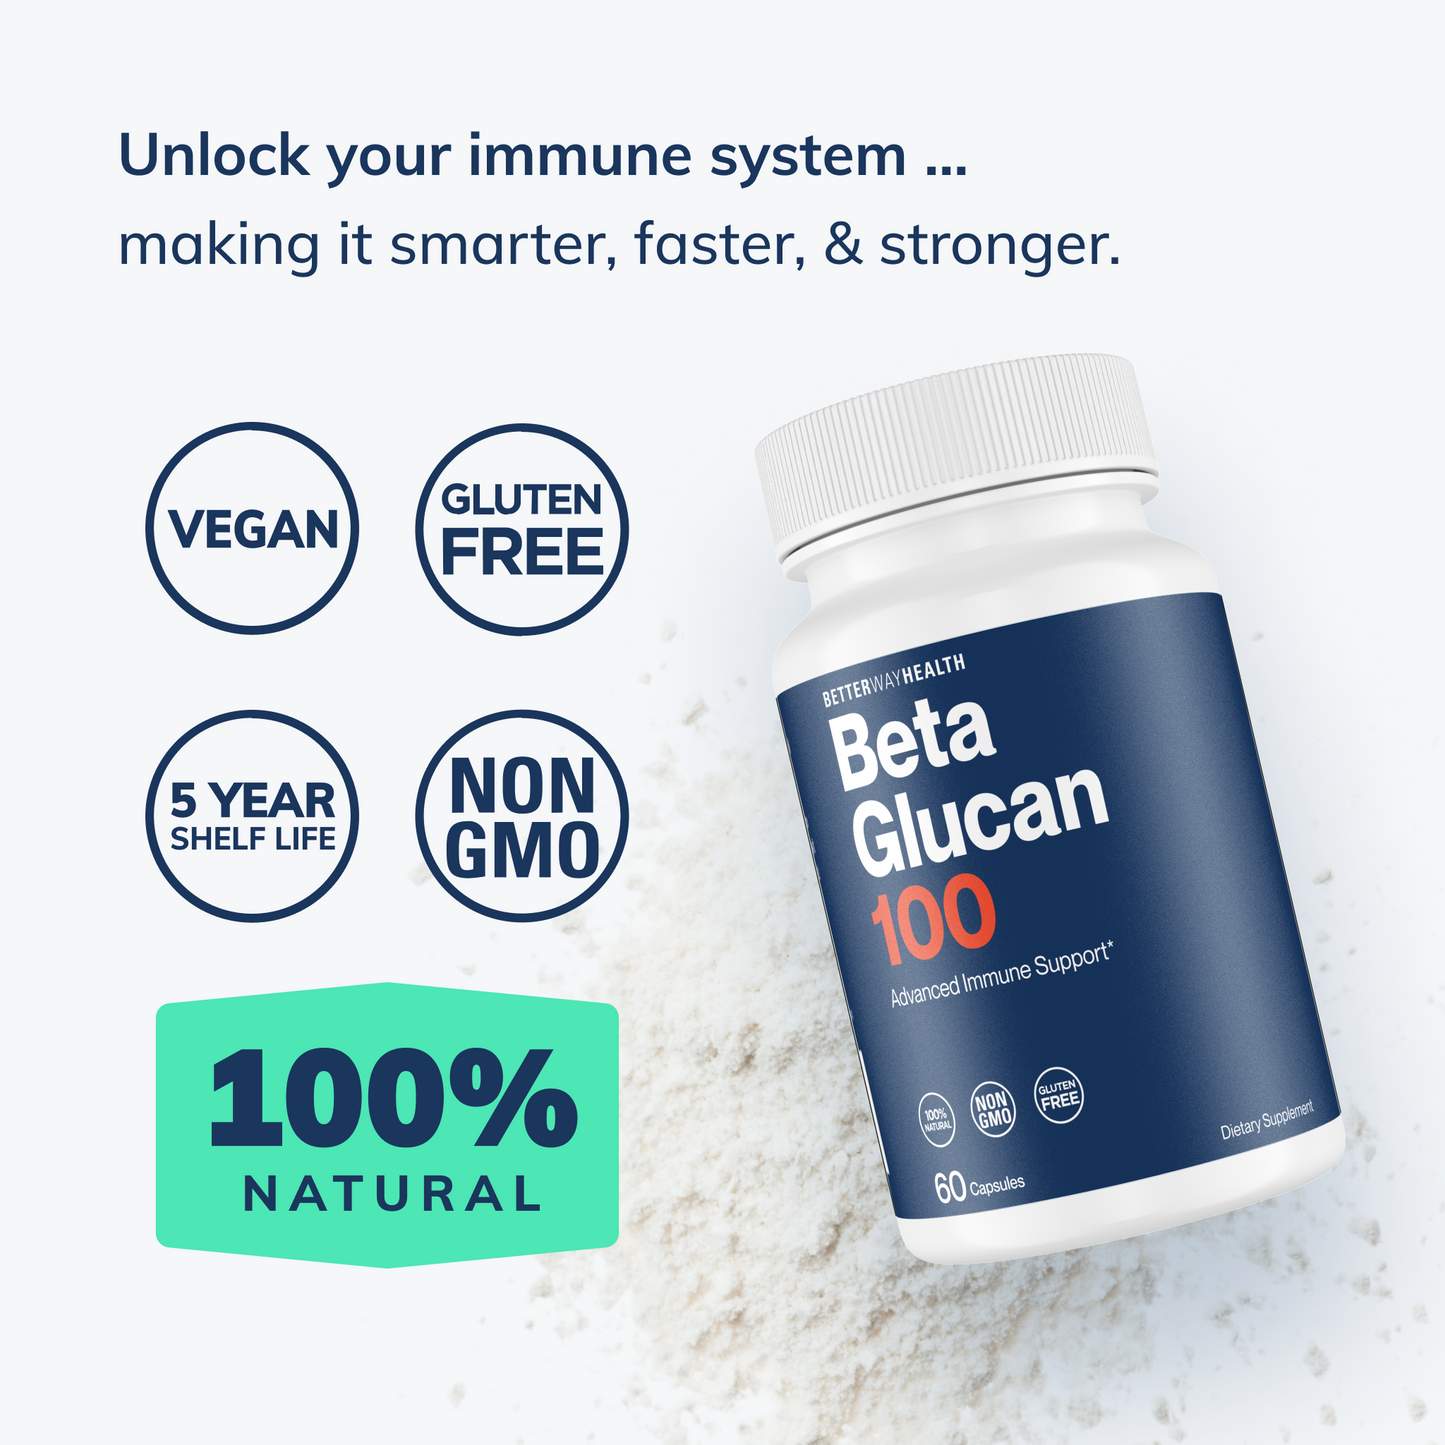 this infographic shows the 100% natural product of beta glucan immune support supplement and supporting information.